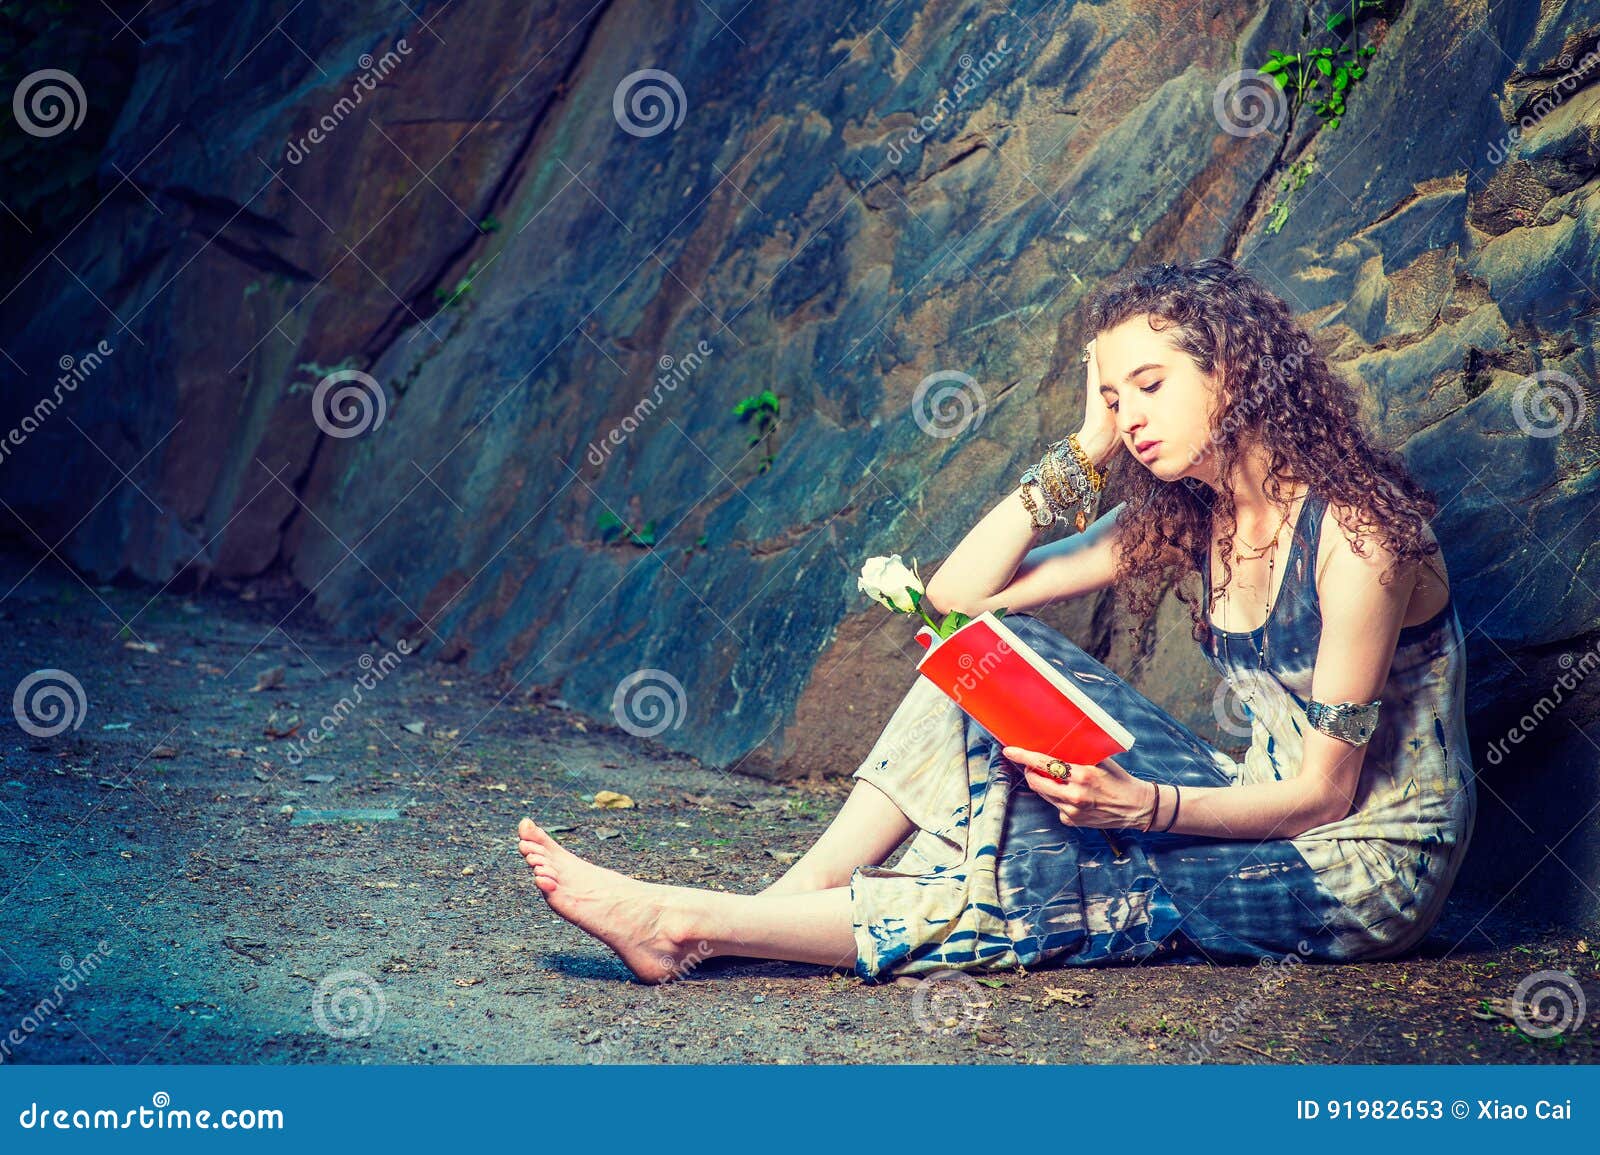 https://thumbs.dreamstime.com/z/young-american-woman-reading-red-book-sitting-ground-traveling-new-york-summer-girl-outside-wearing-long-dress-barefoot-91982653.jpg